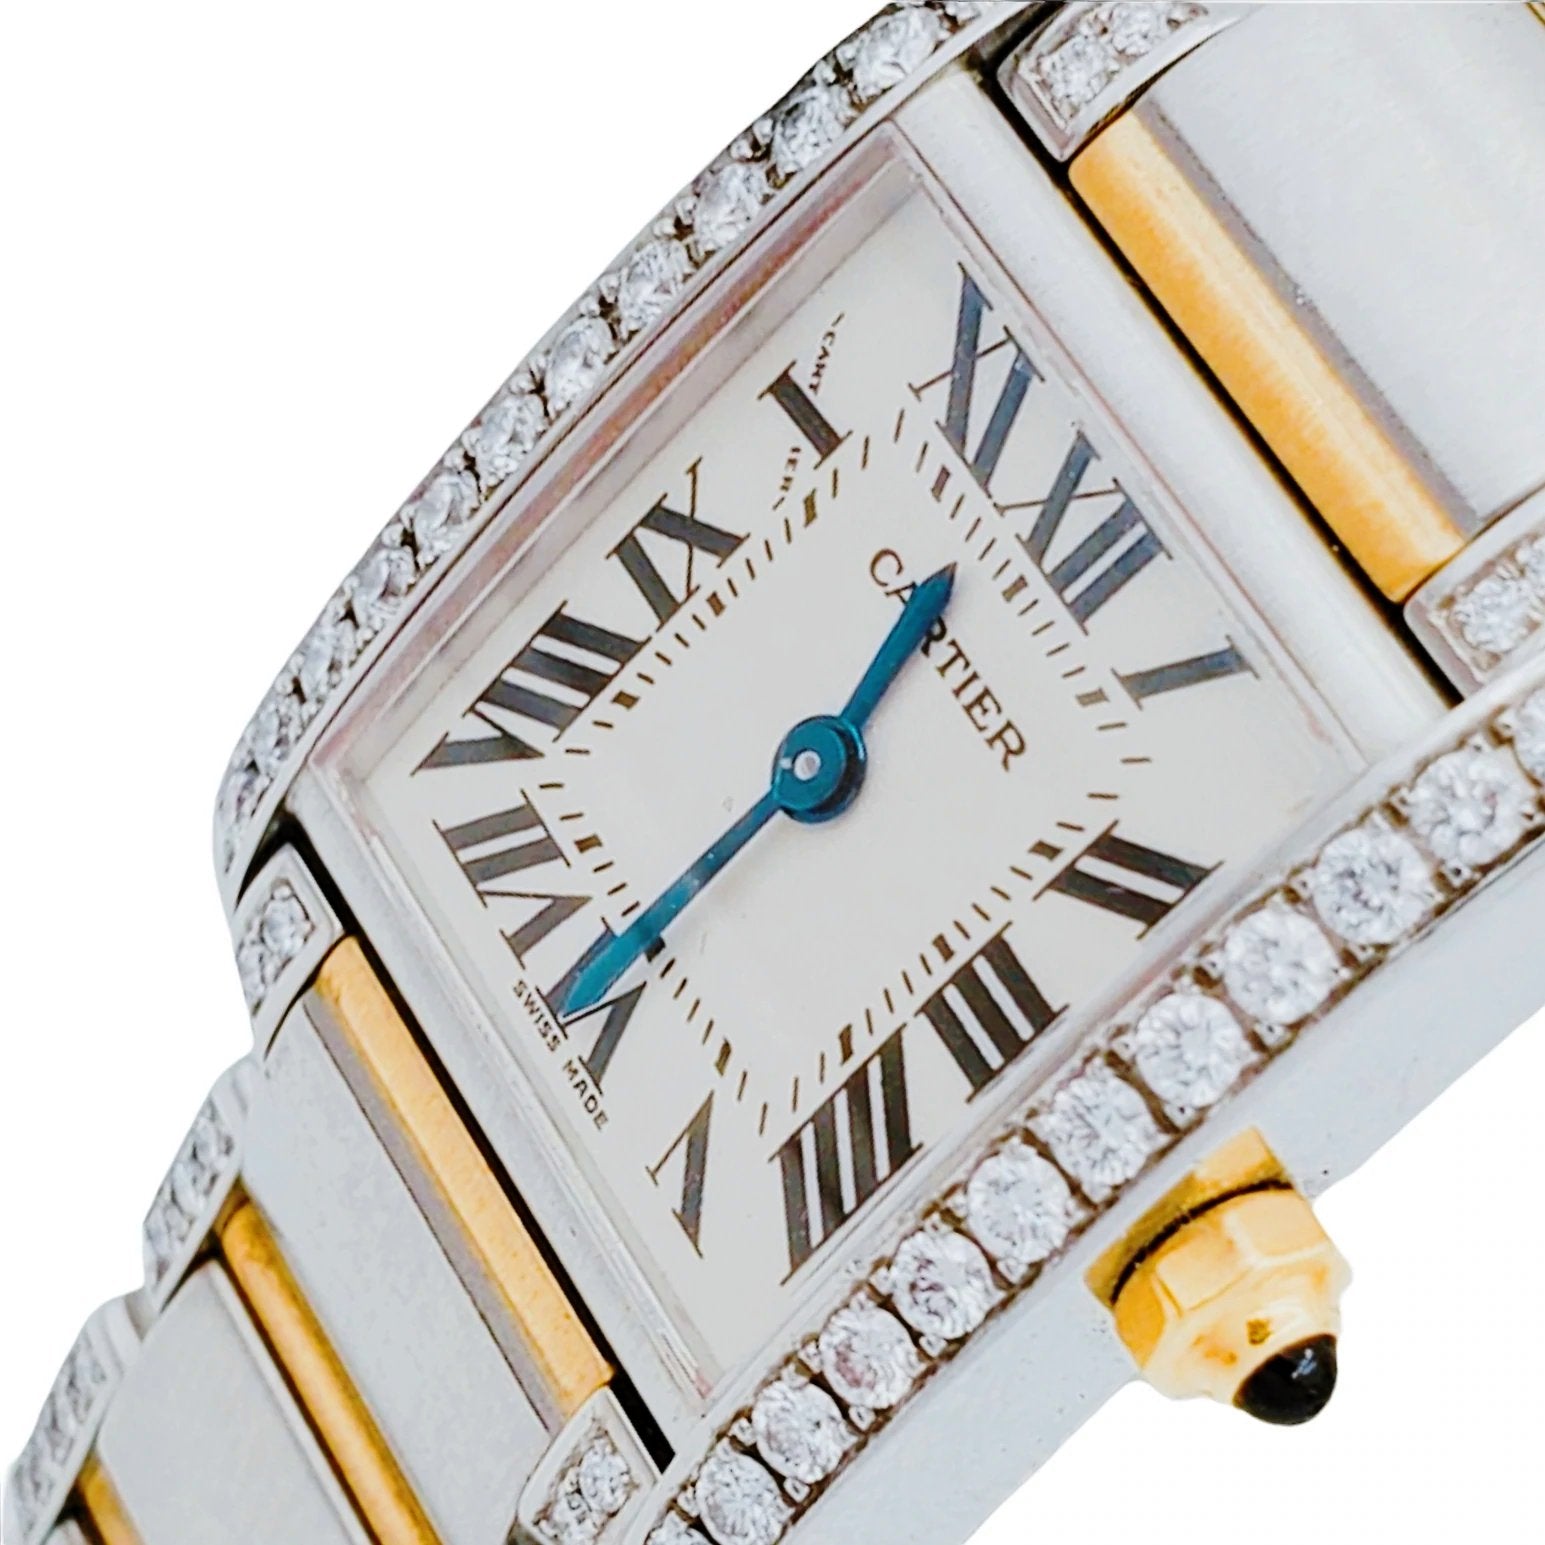 Tank Francaise 18K Rose Gold Quartz Ladies Watch W500264h by Cartier for  Luxury Clothing